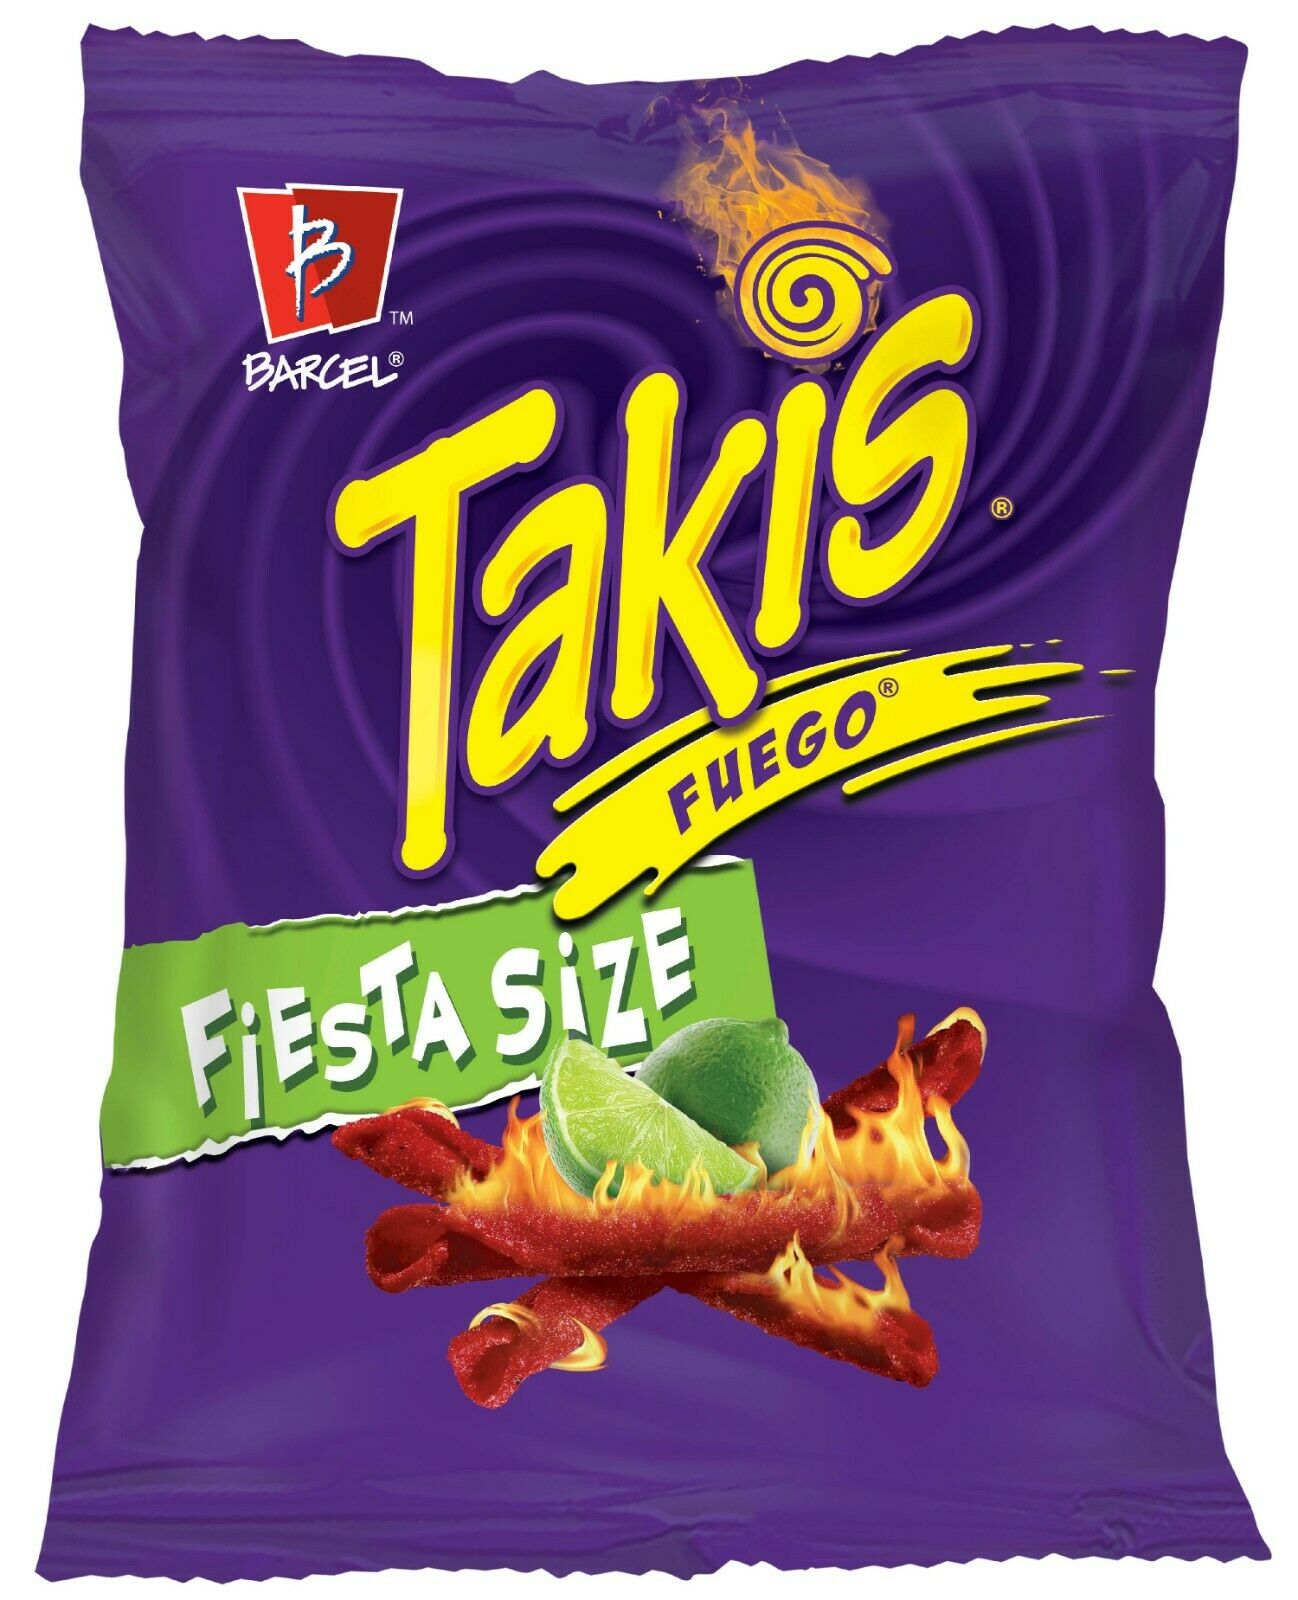 New Barcel Takis Fiesta Size Fuego Hot Chili Pepper & Lime Tortilla Chips 20 Oz